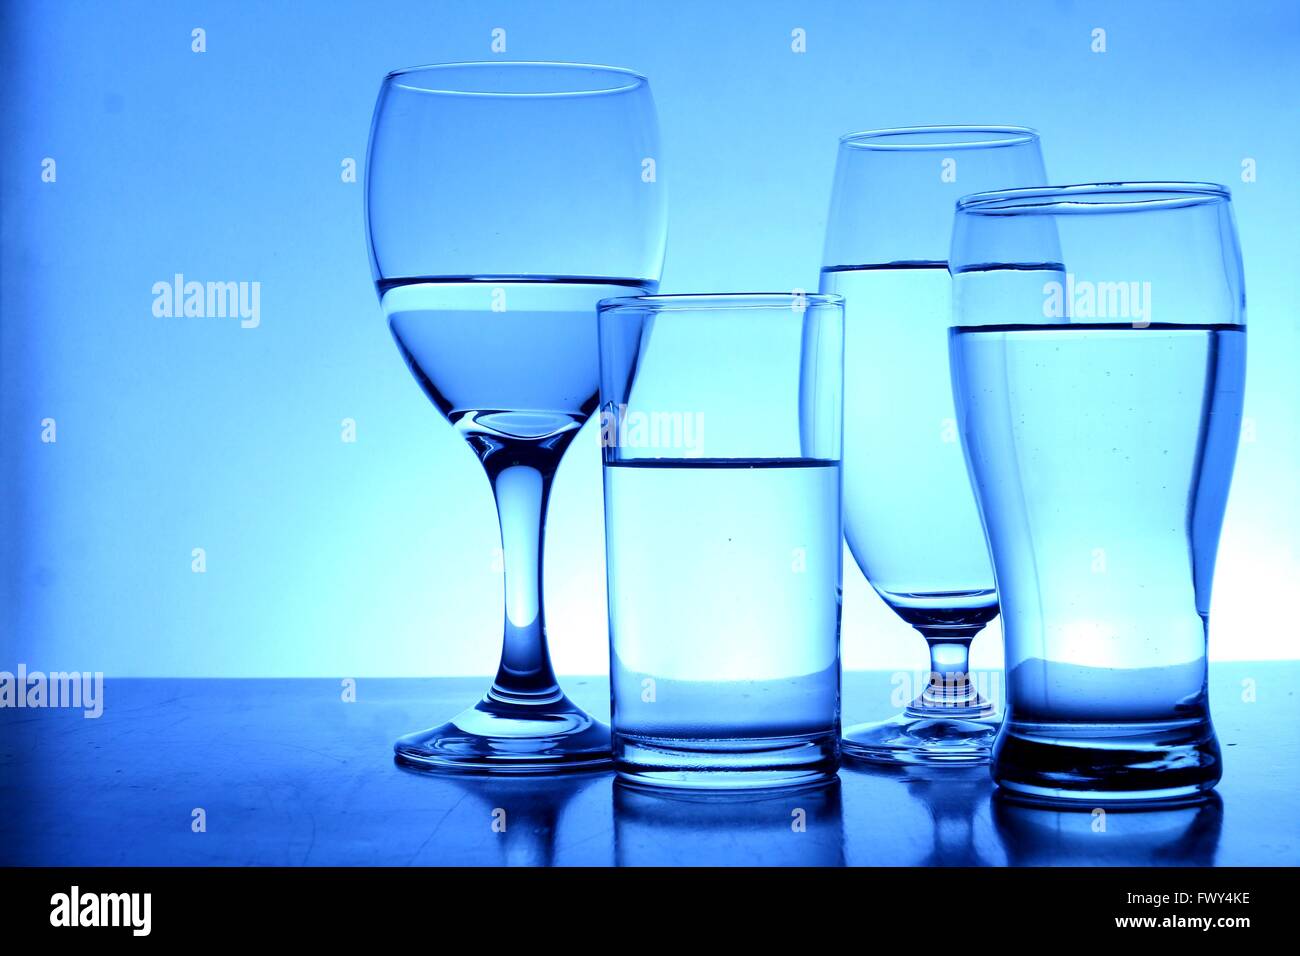 Different glasses of water Stock Photo